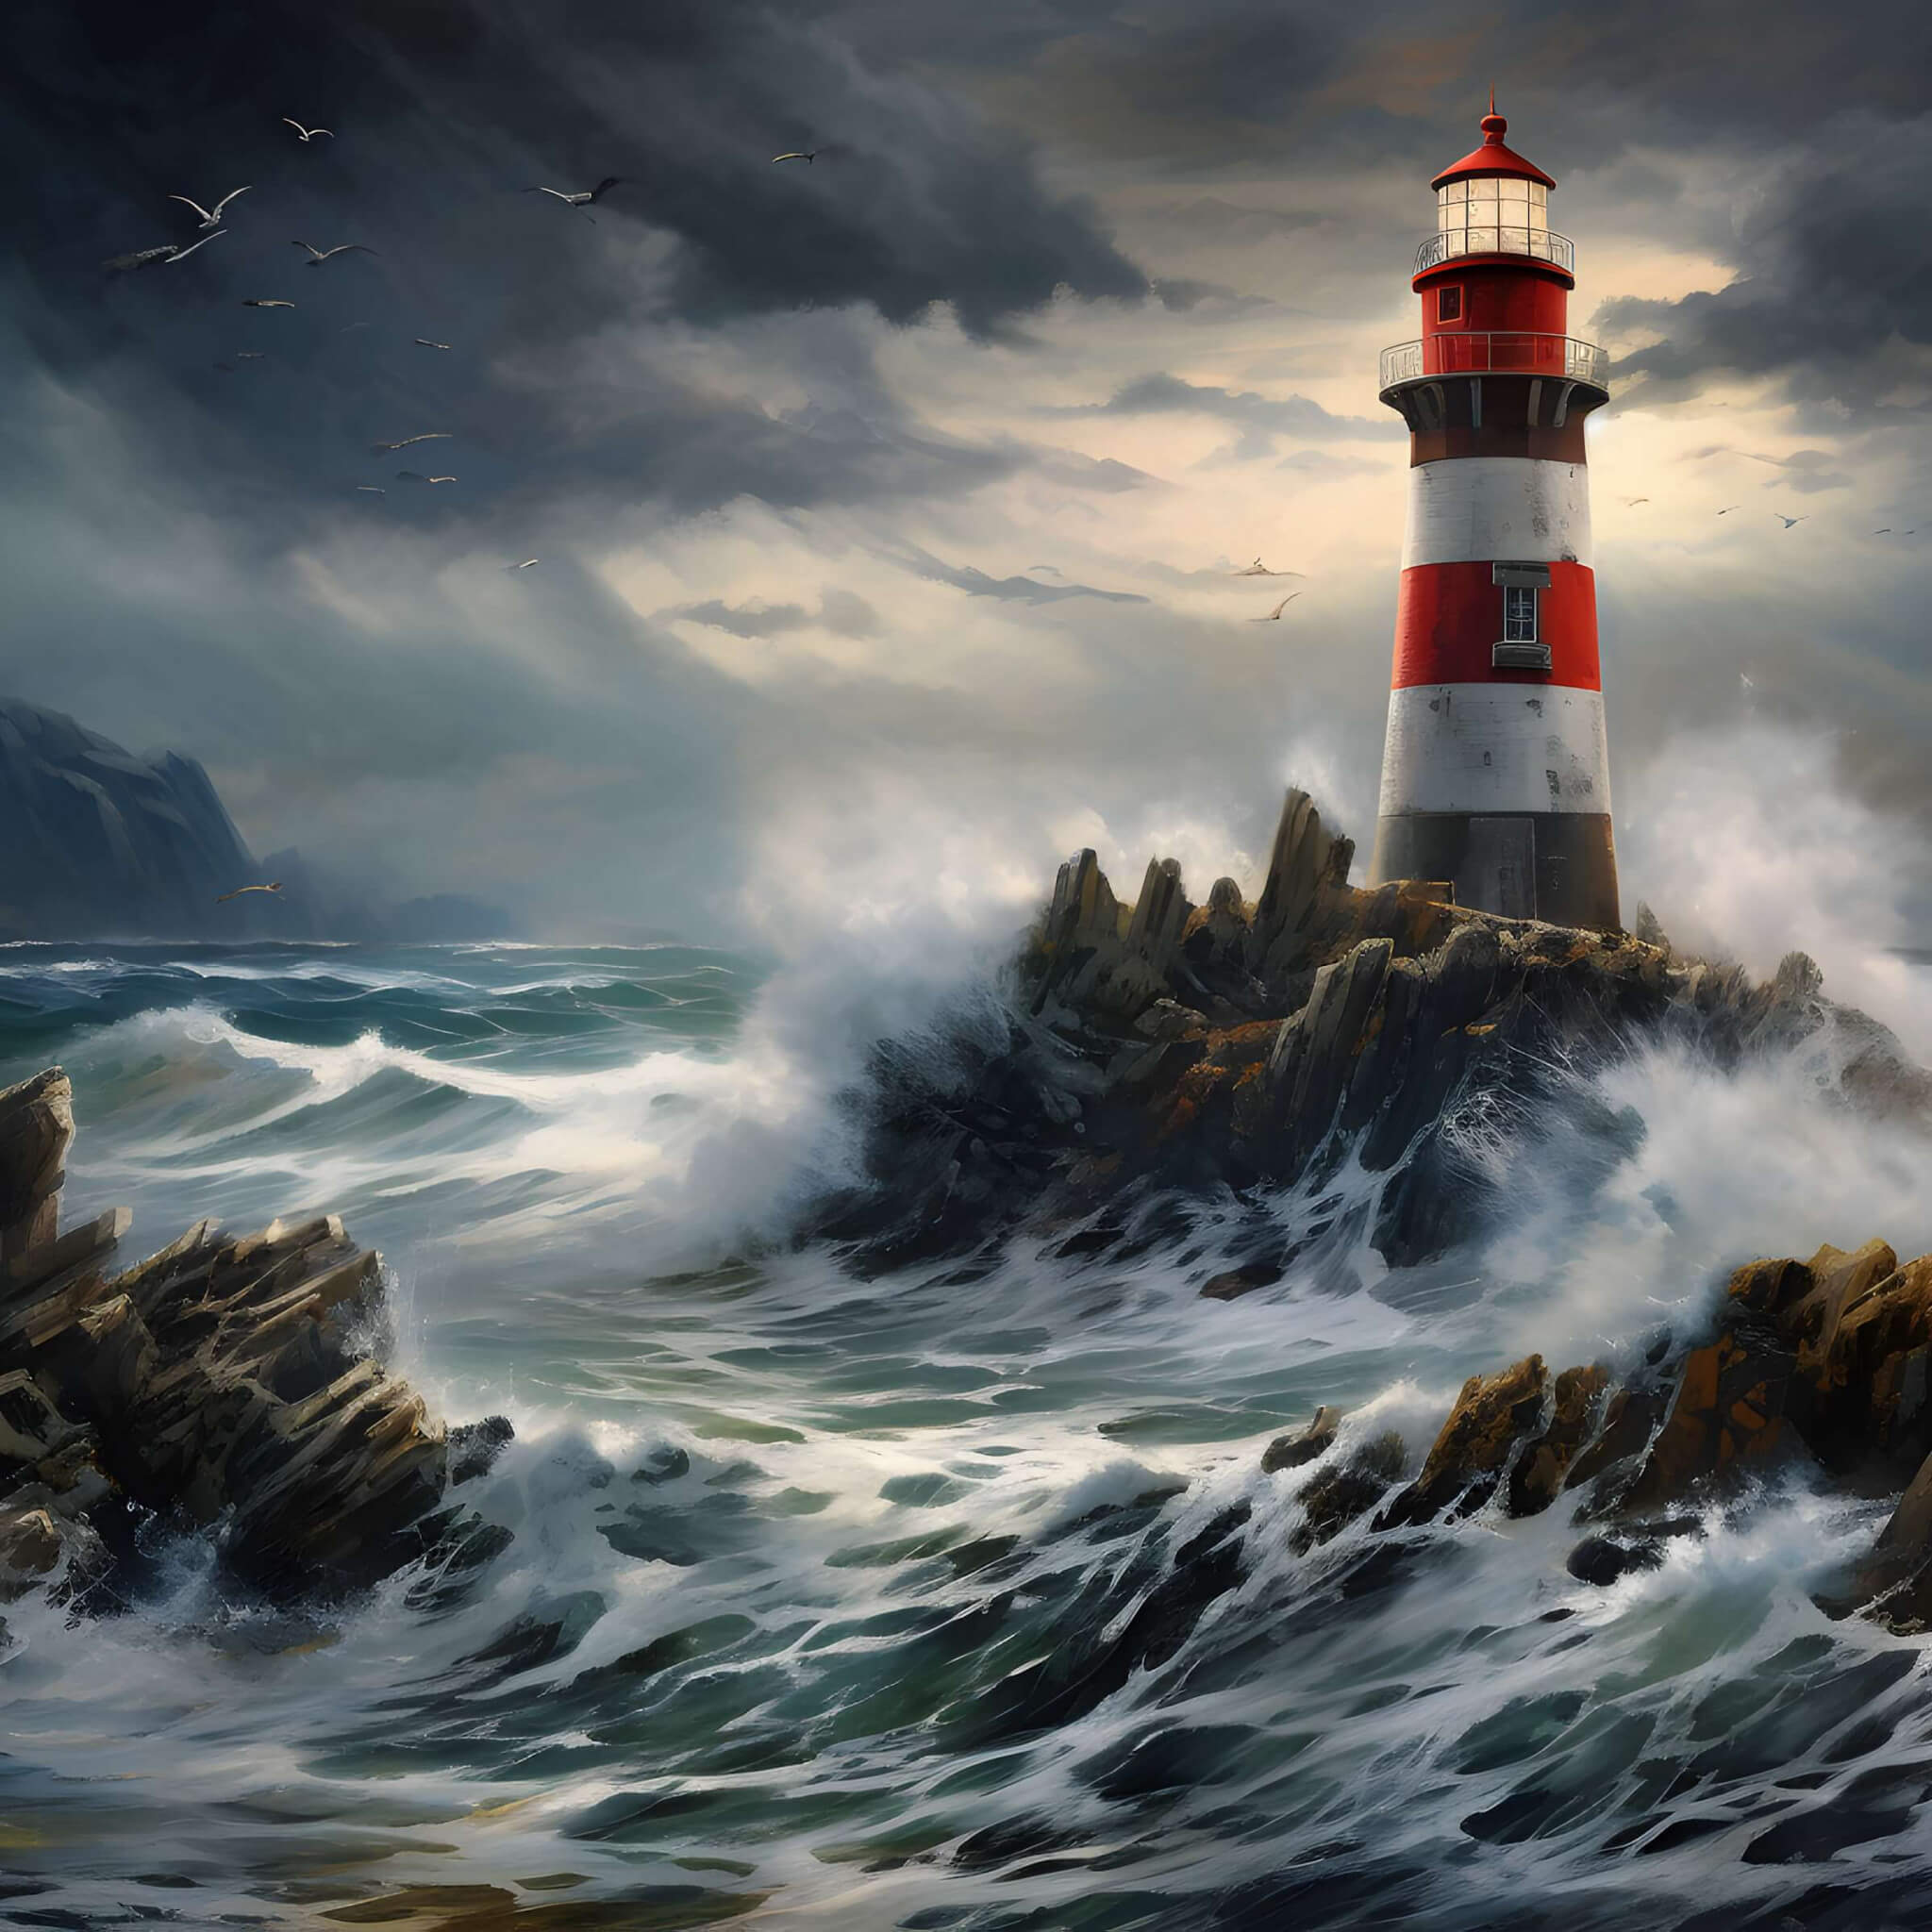 Lighthouse in the ocean waves wallpaper 2048x2048